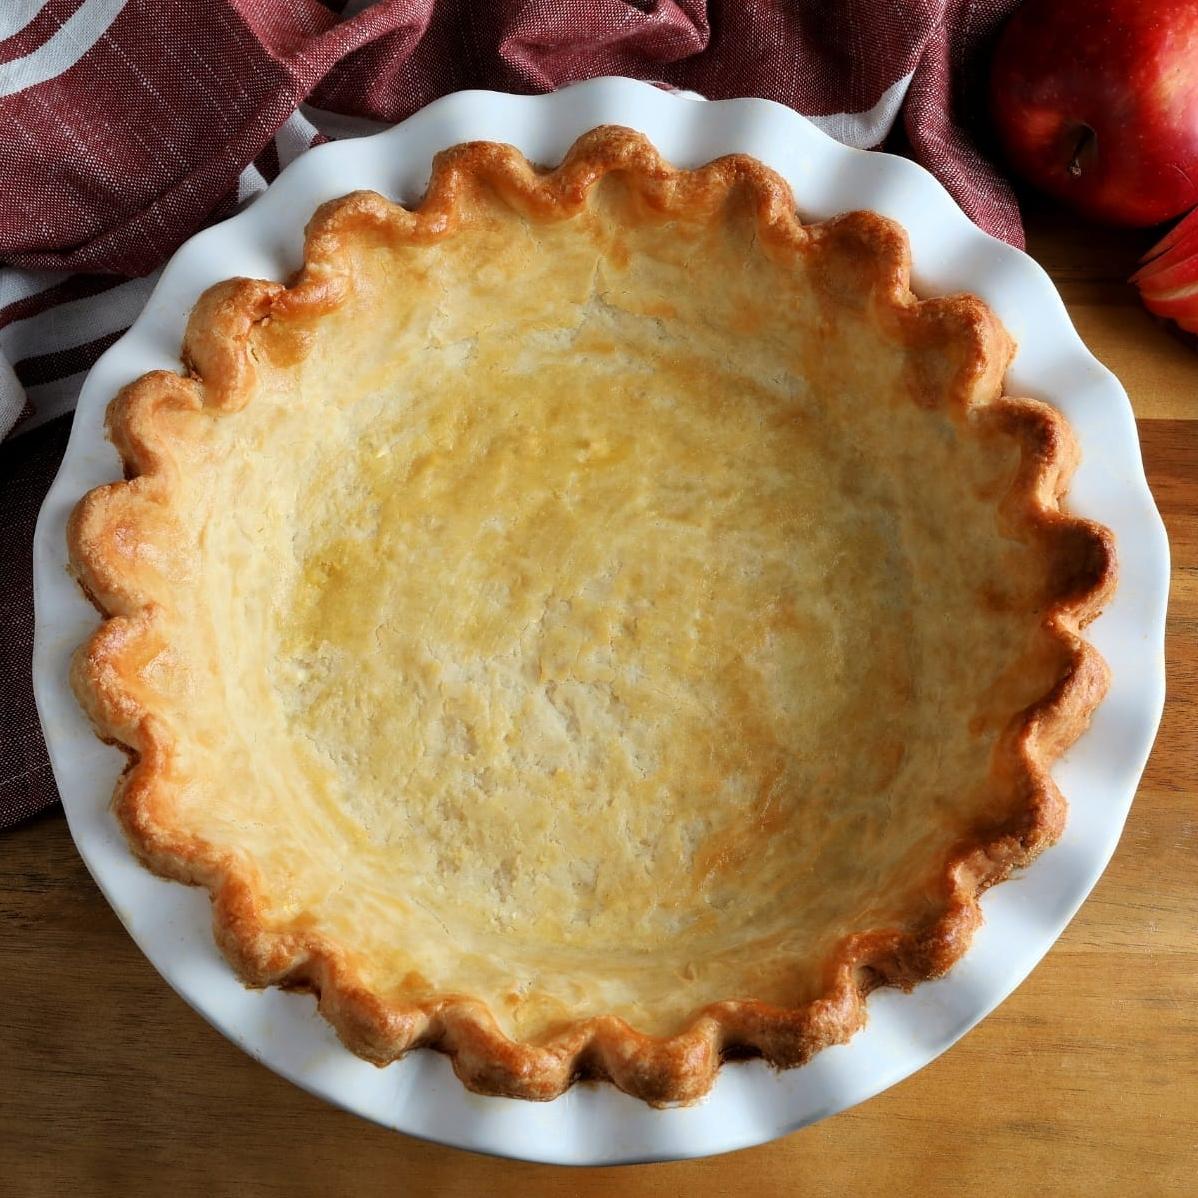  It's pie o'clock! Get ready to make the perfect gluten-free crust for your favorite filling